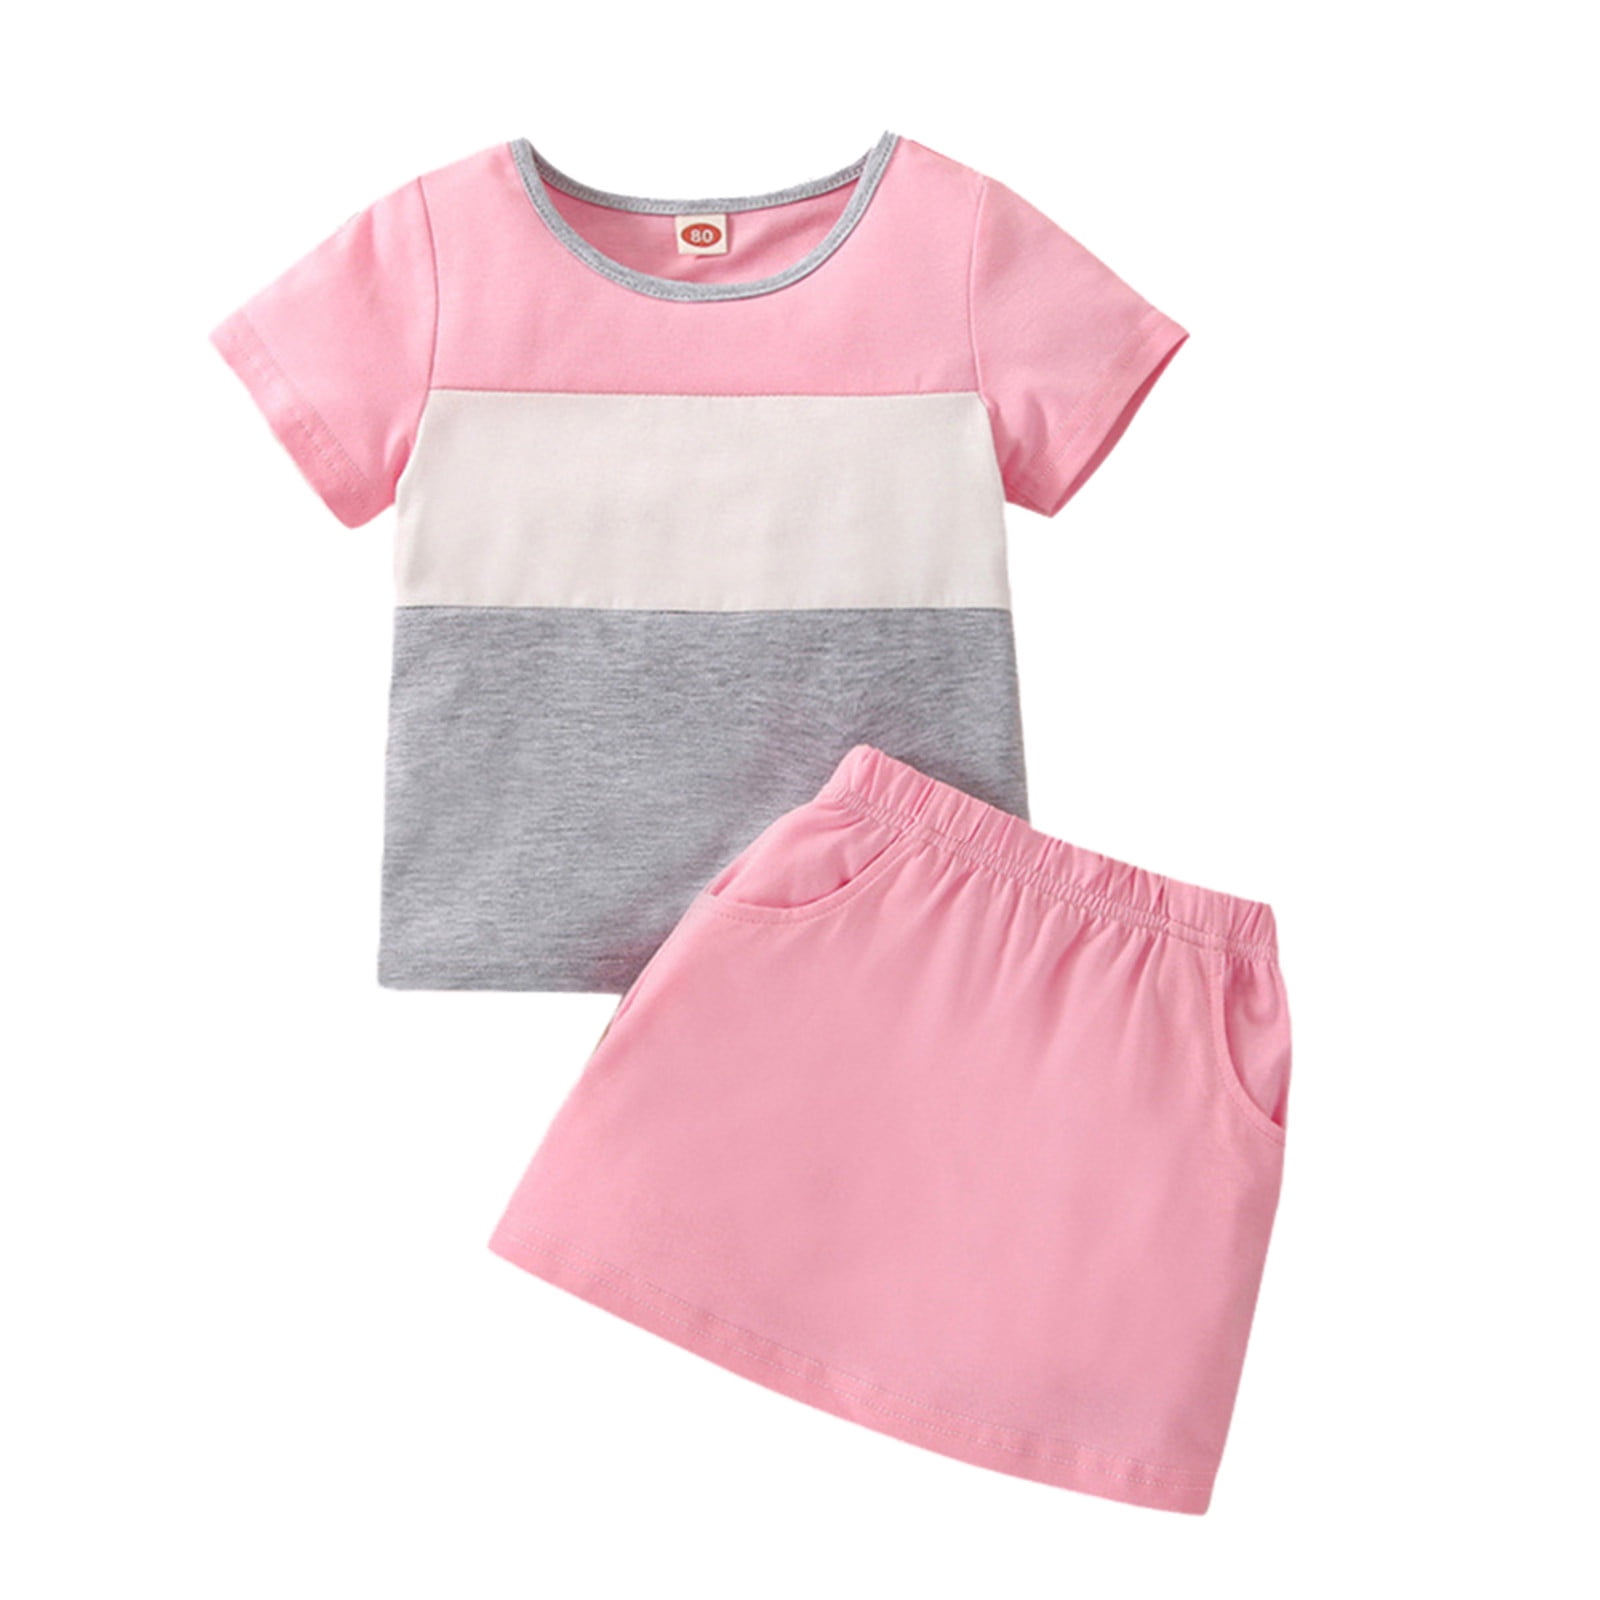  Just Love Girls Two Piece Fleece Set (Pack of 2) 17017-A-12M:  Clothing, Shoes & Jewelry